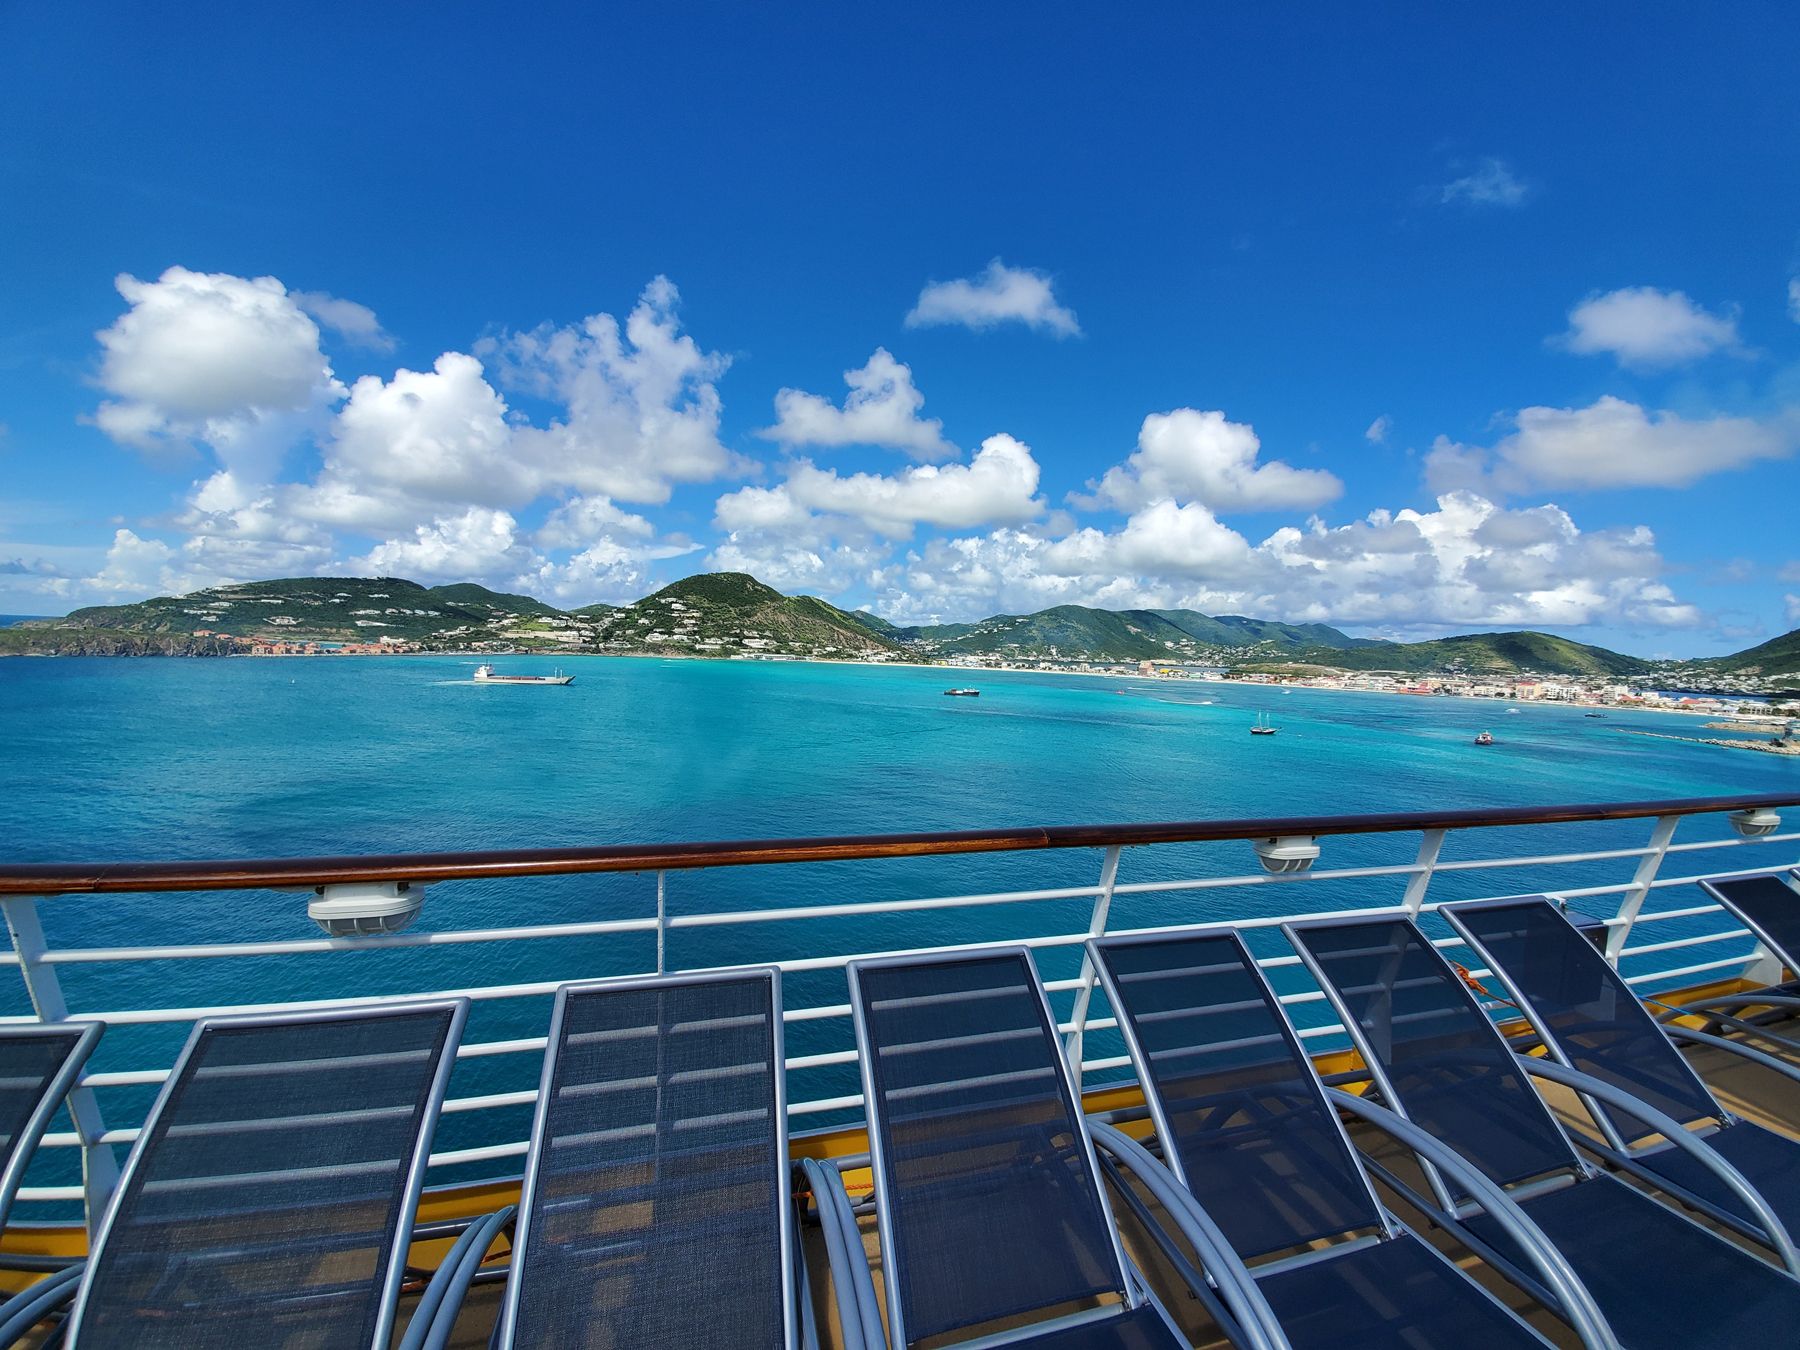 View from the deck of a cruise ship in Saint Martin (source: James Thomas, Unsplash)